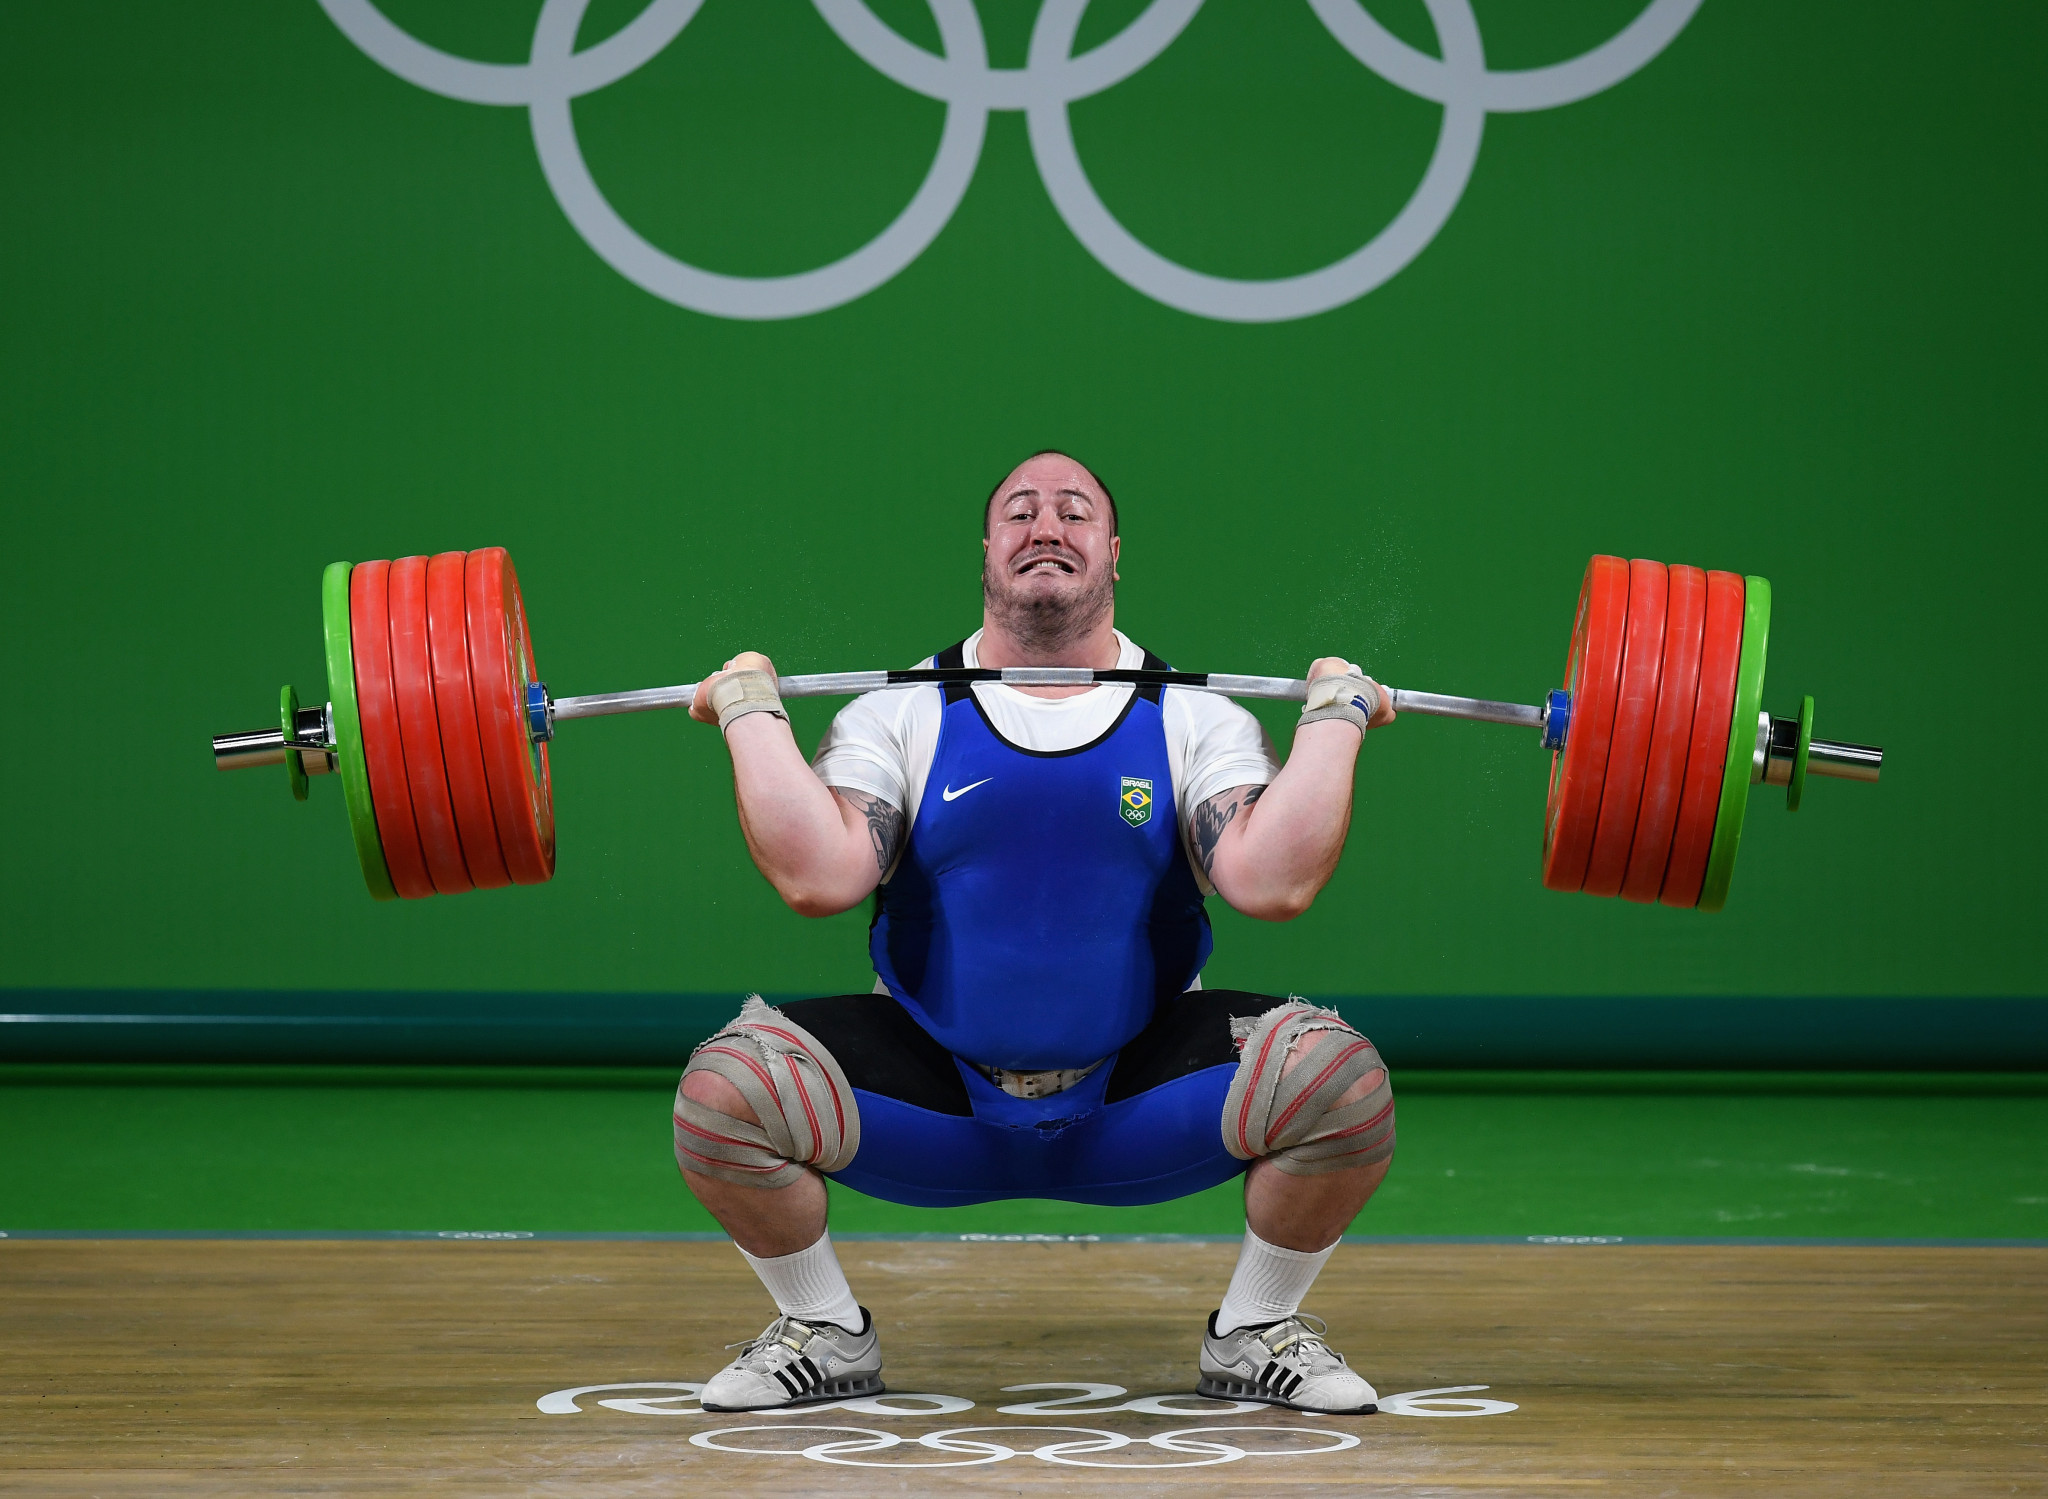 Fernando Reis is hoping to become the first Brazilian to win an Olympic weightlifting medal at Tokyo 2020 ©Getty Images